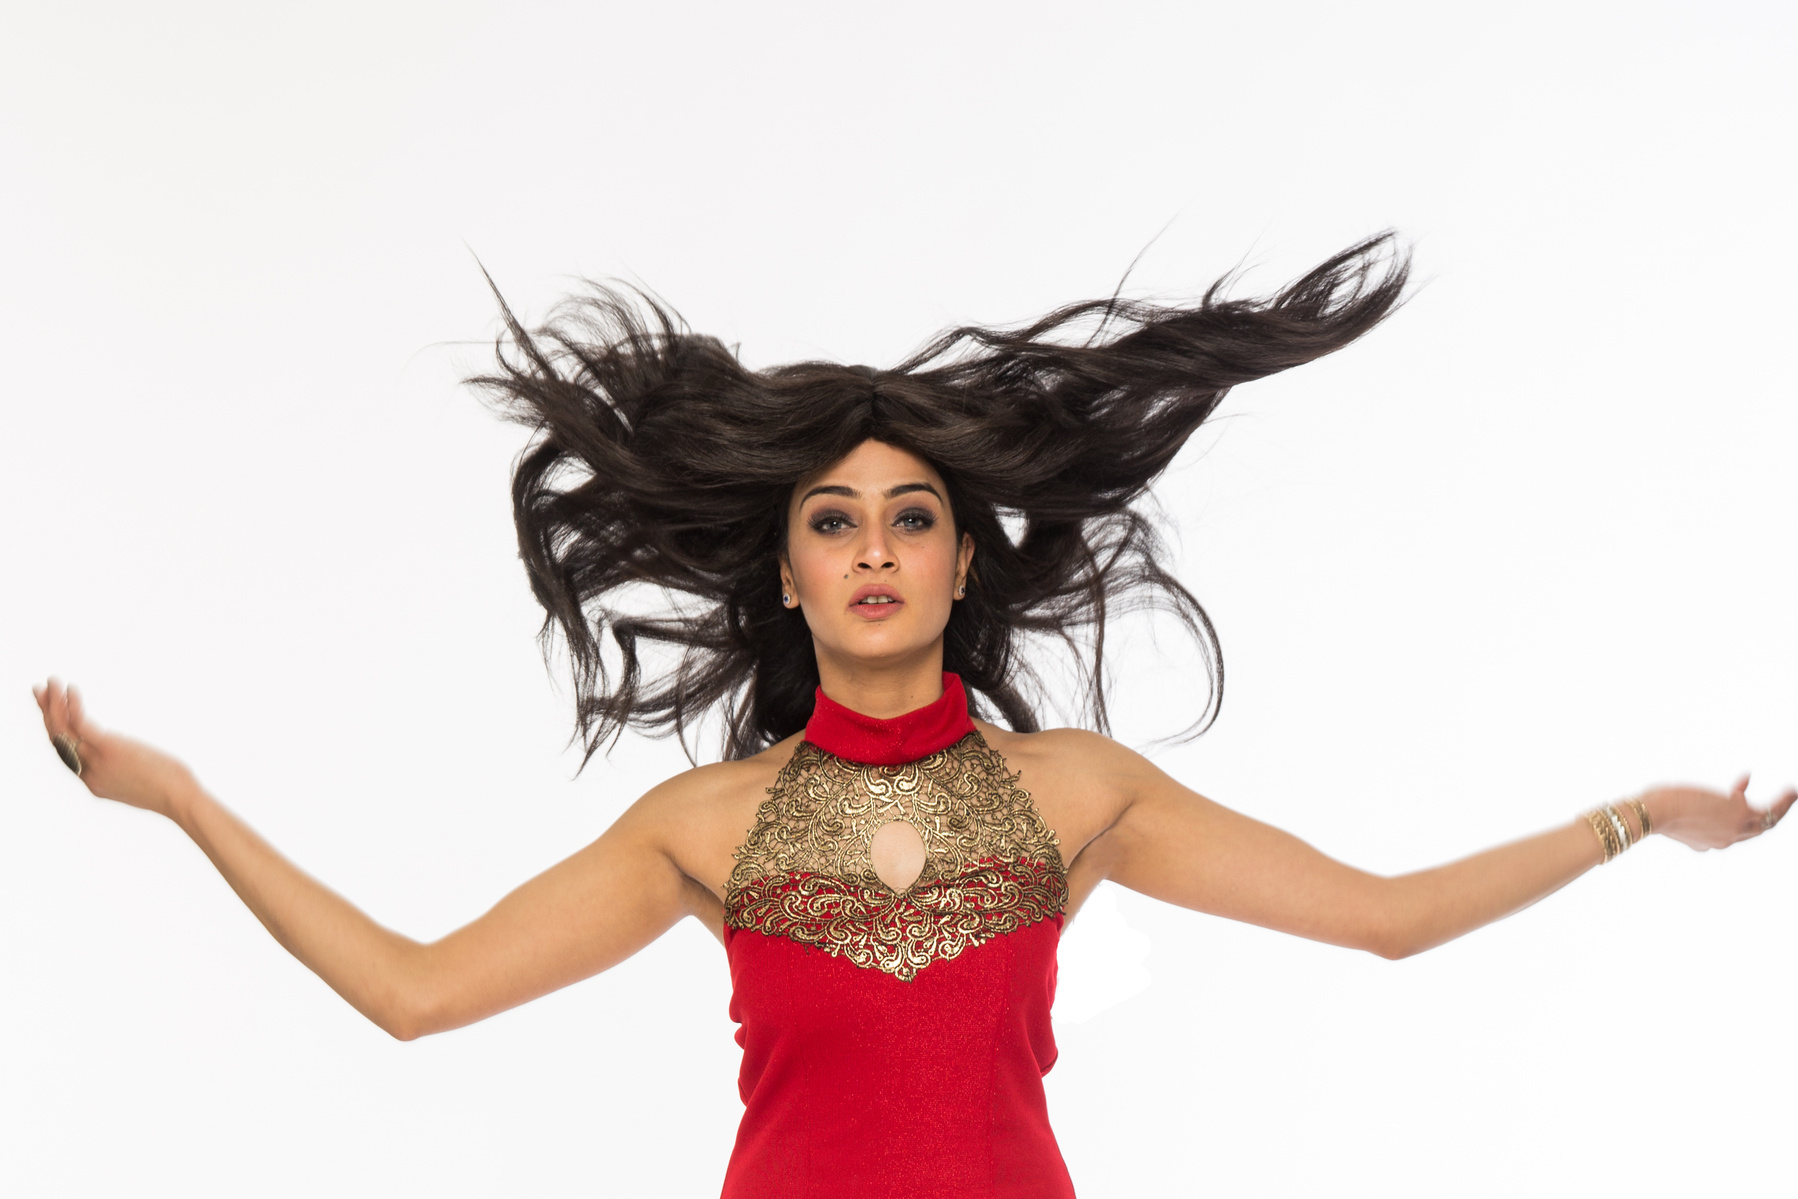 Professional photography studio portrait of a woman jumping wearing a red dress and hair flying in the air